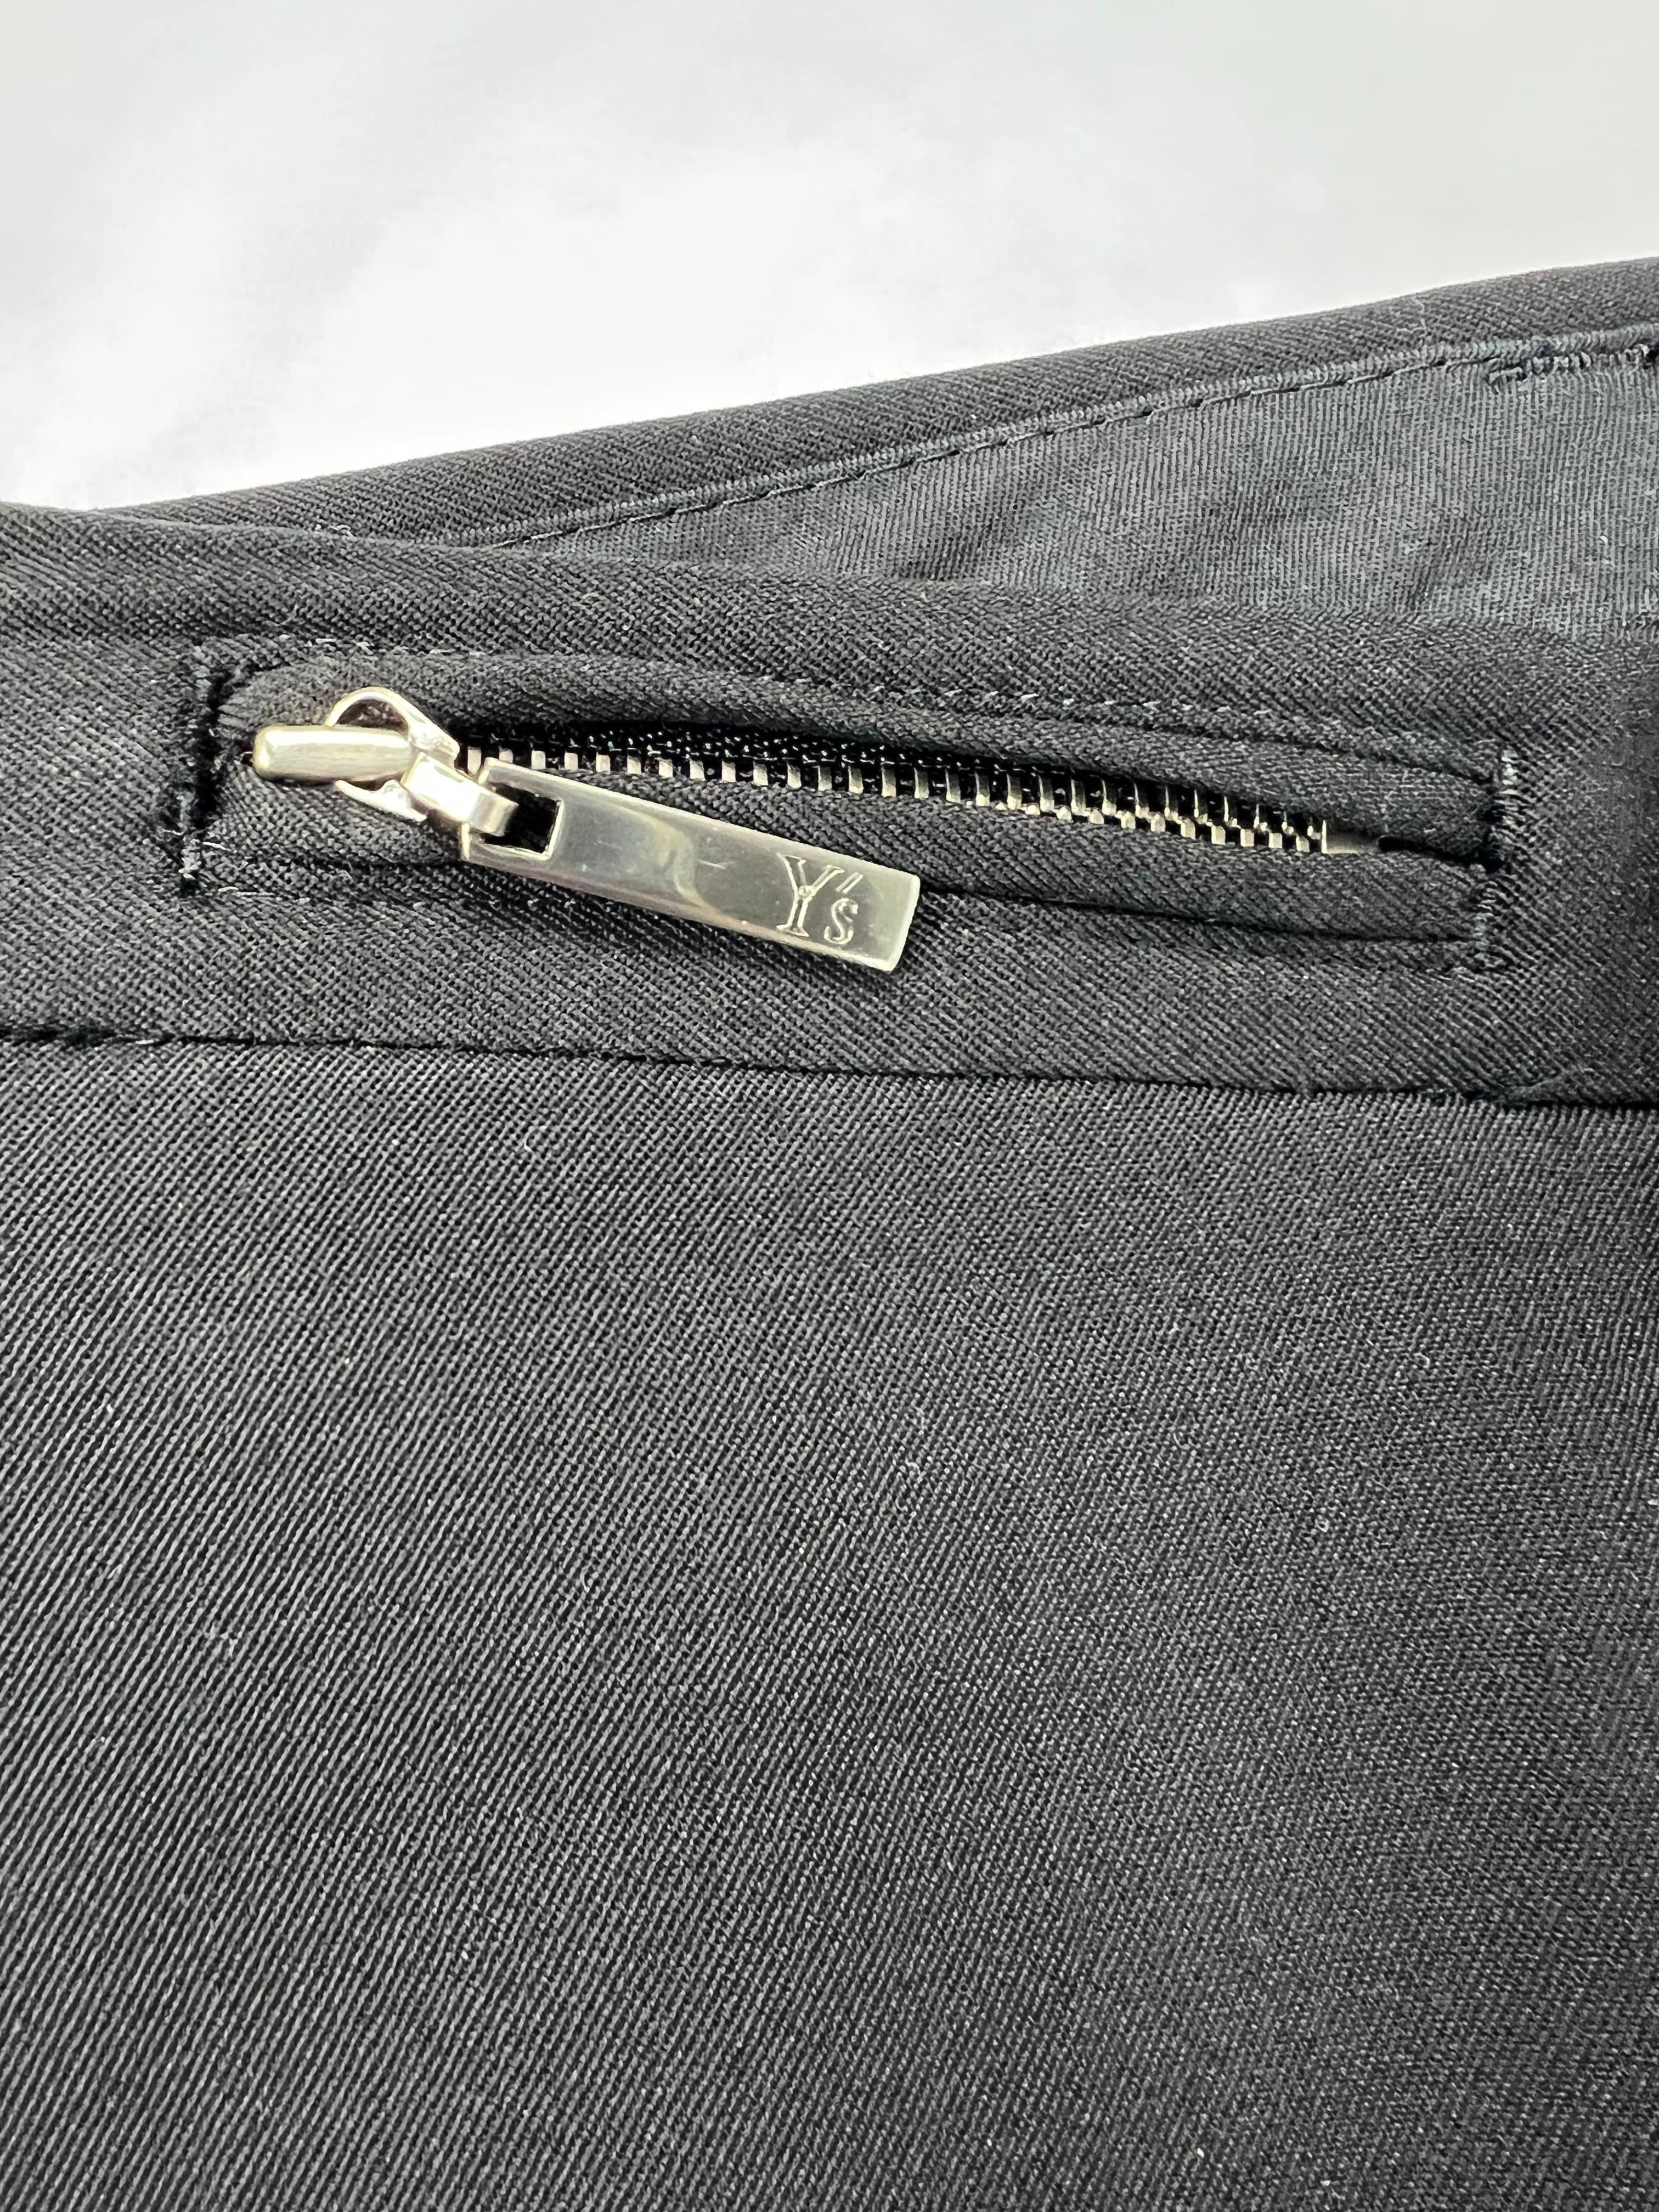 Vintage Black Wool Trousers Pants In Good Condition For Sale In Beverly Hills, CA